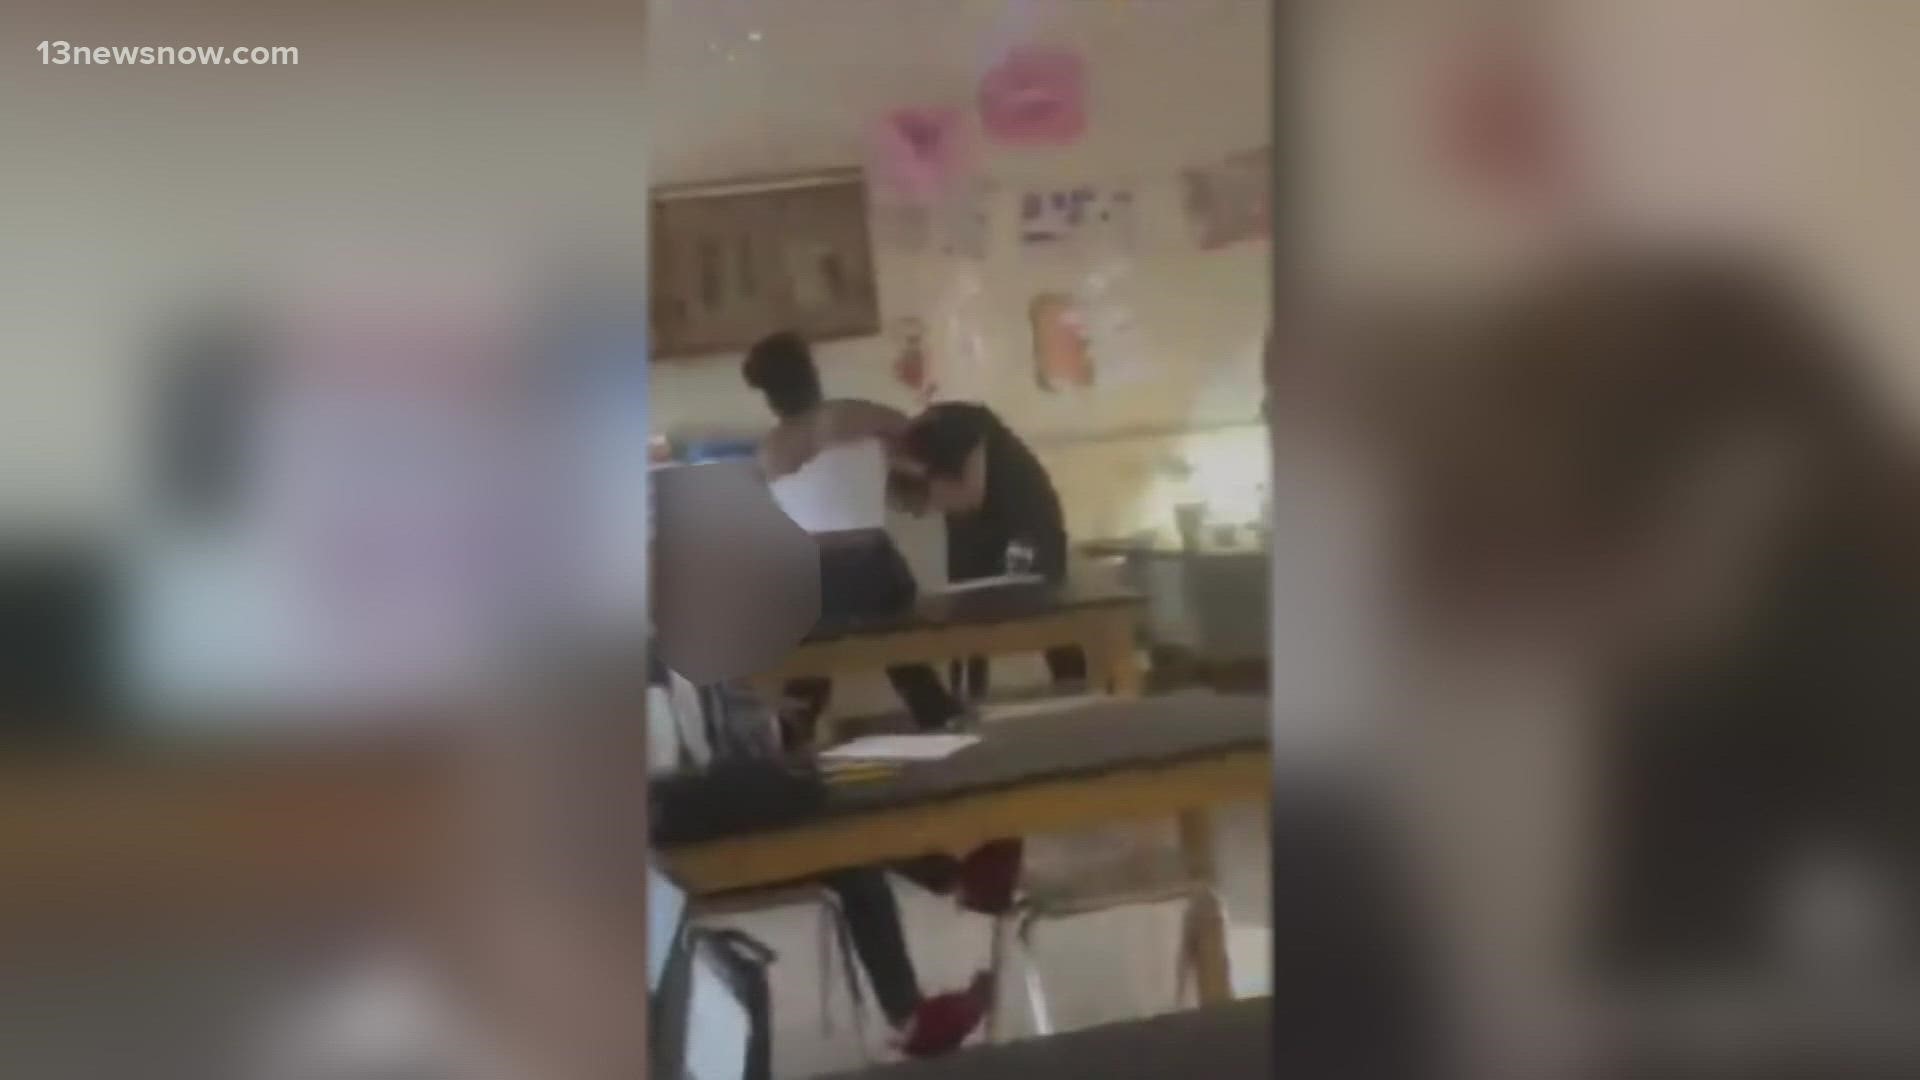 Chesapeake police are investigating after a student was seen on video punching a teacher at Oscar Smith High School.